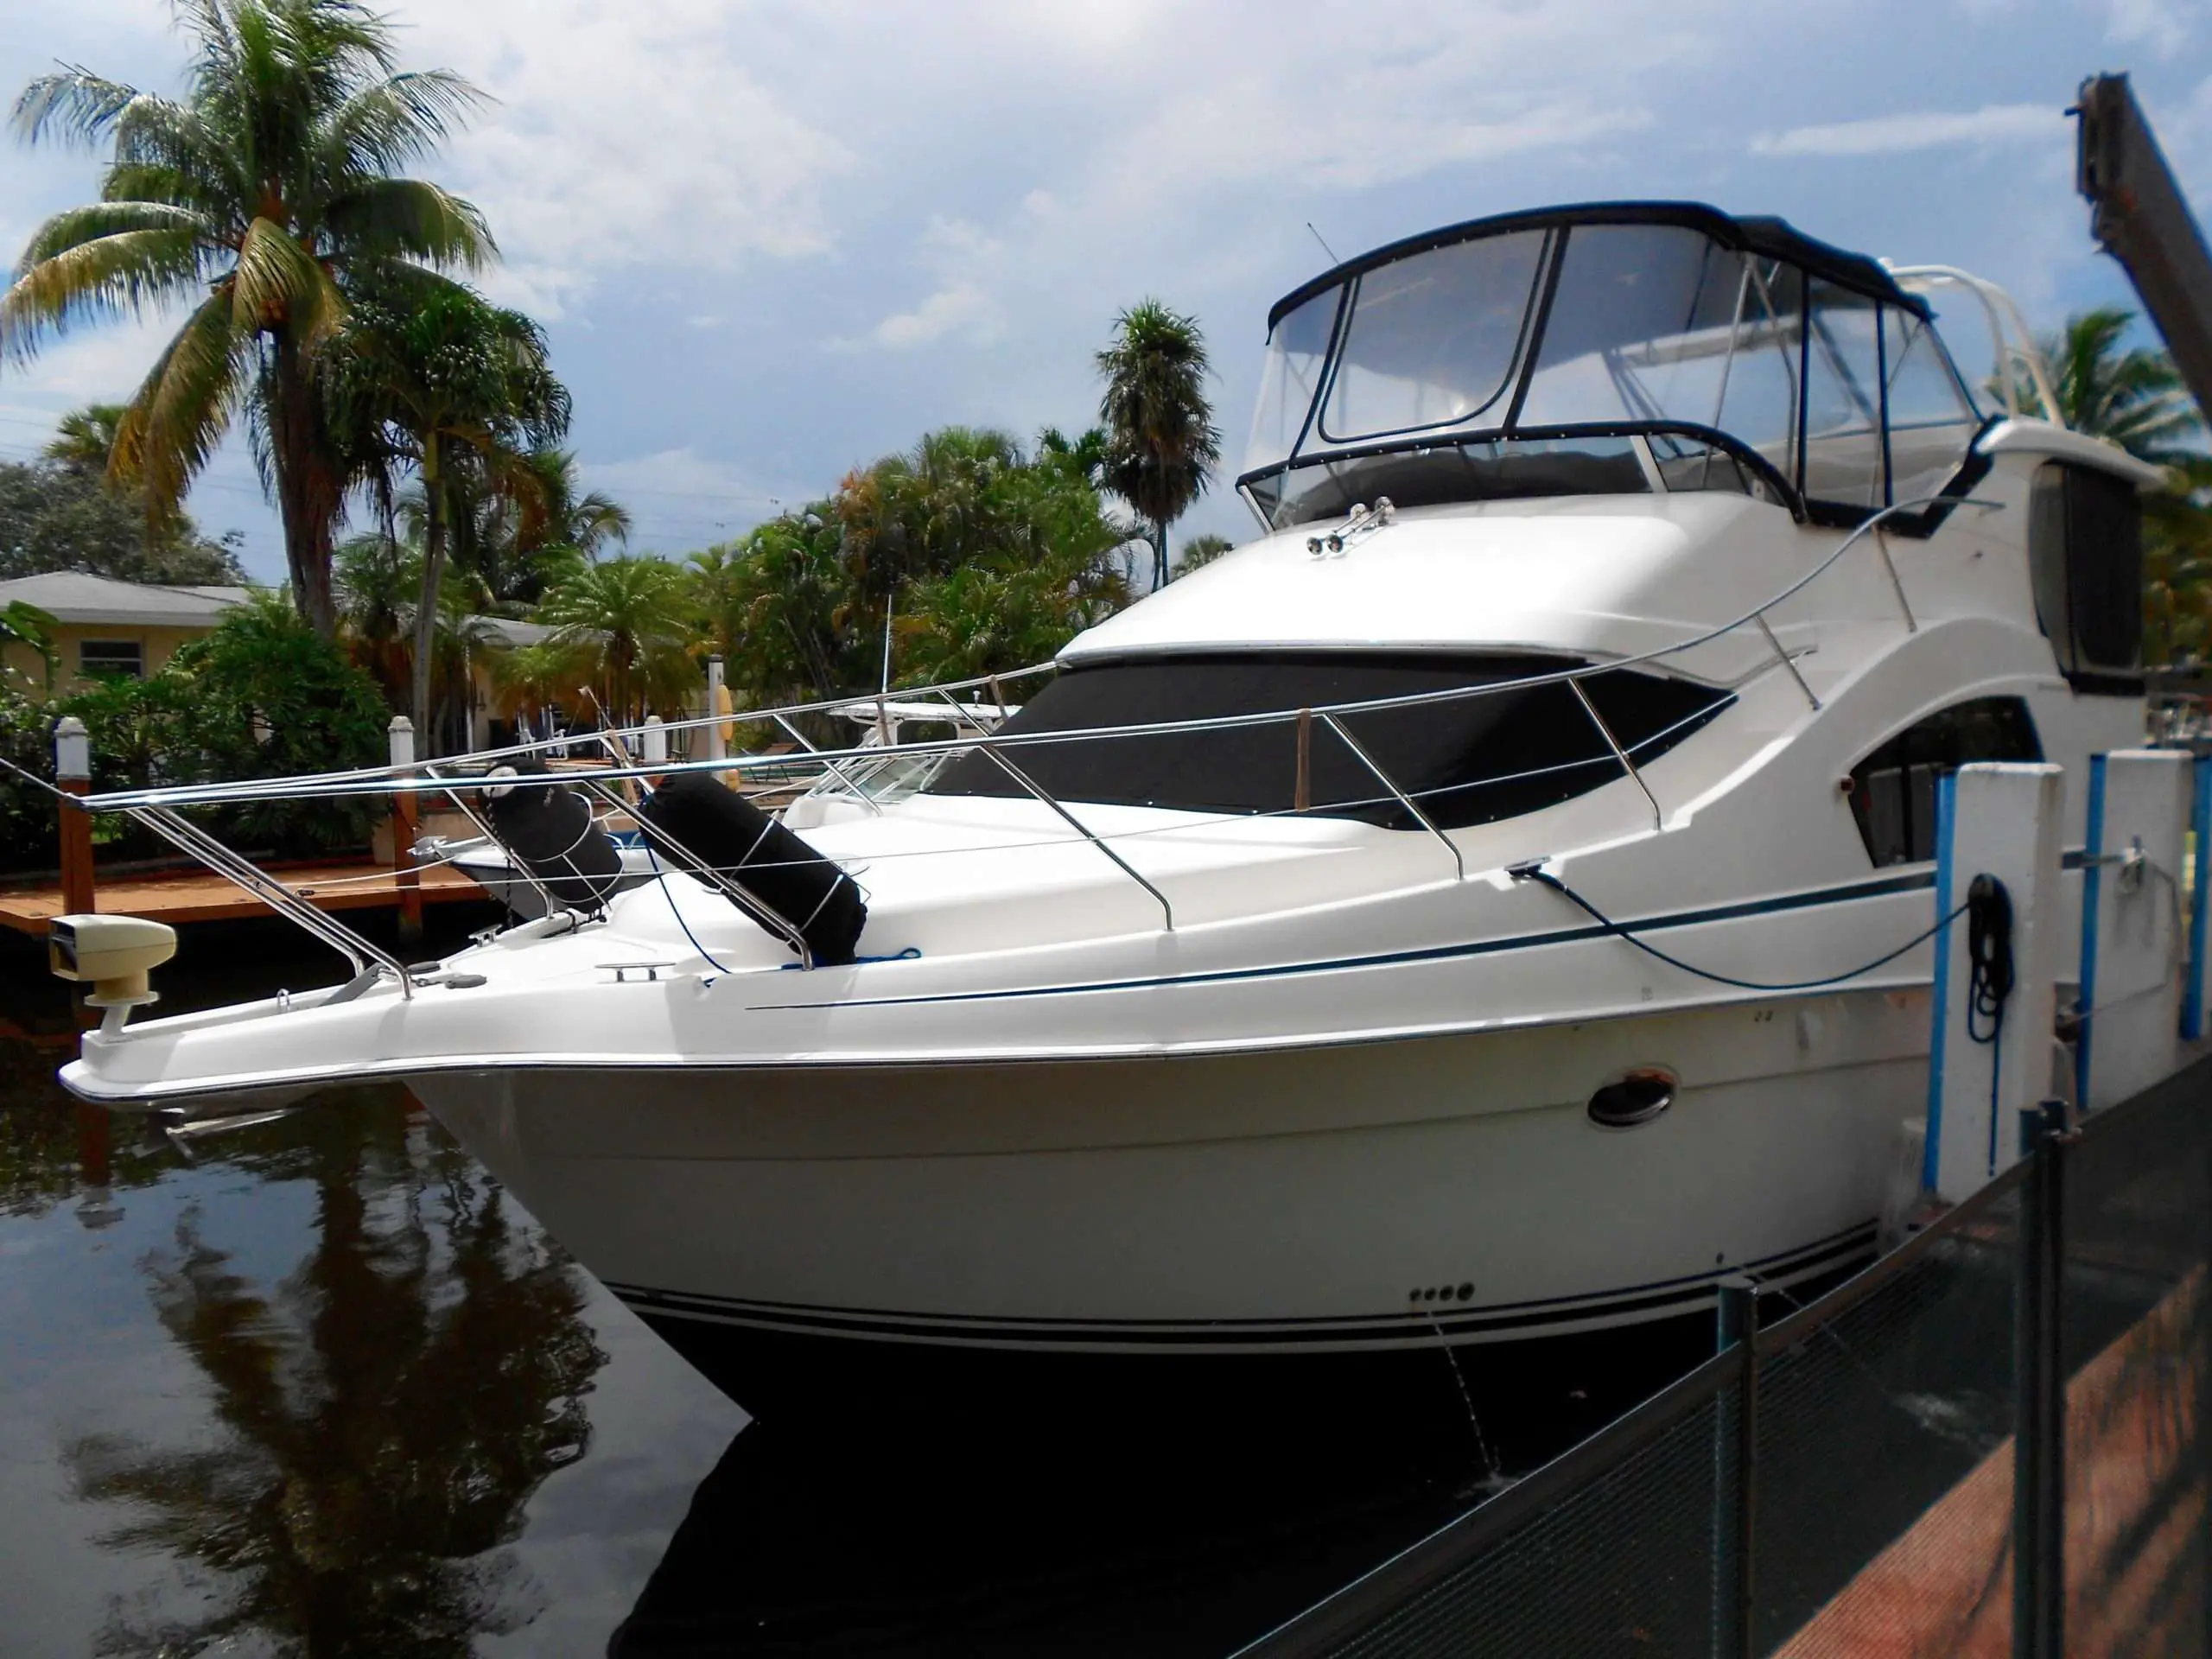 How Much is Boat Insurance in Florida?